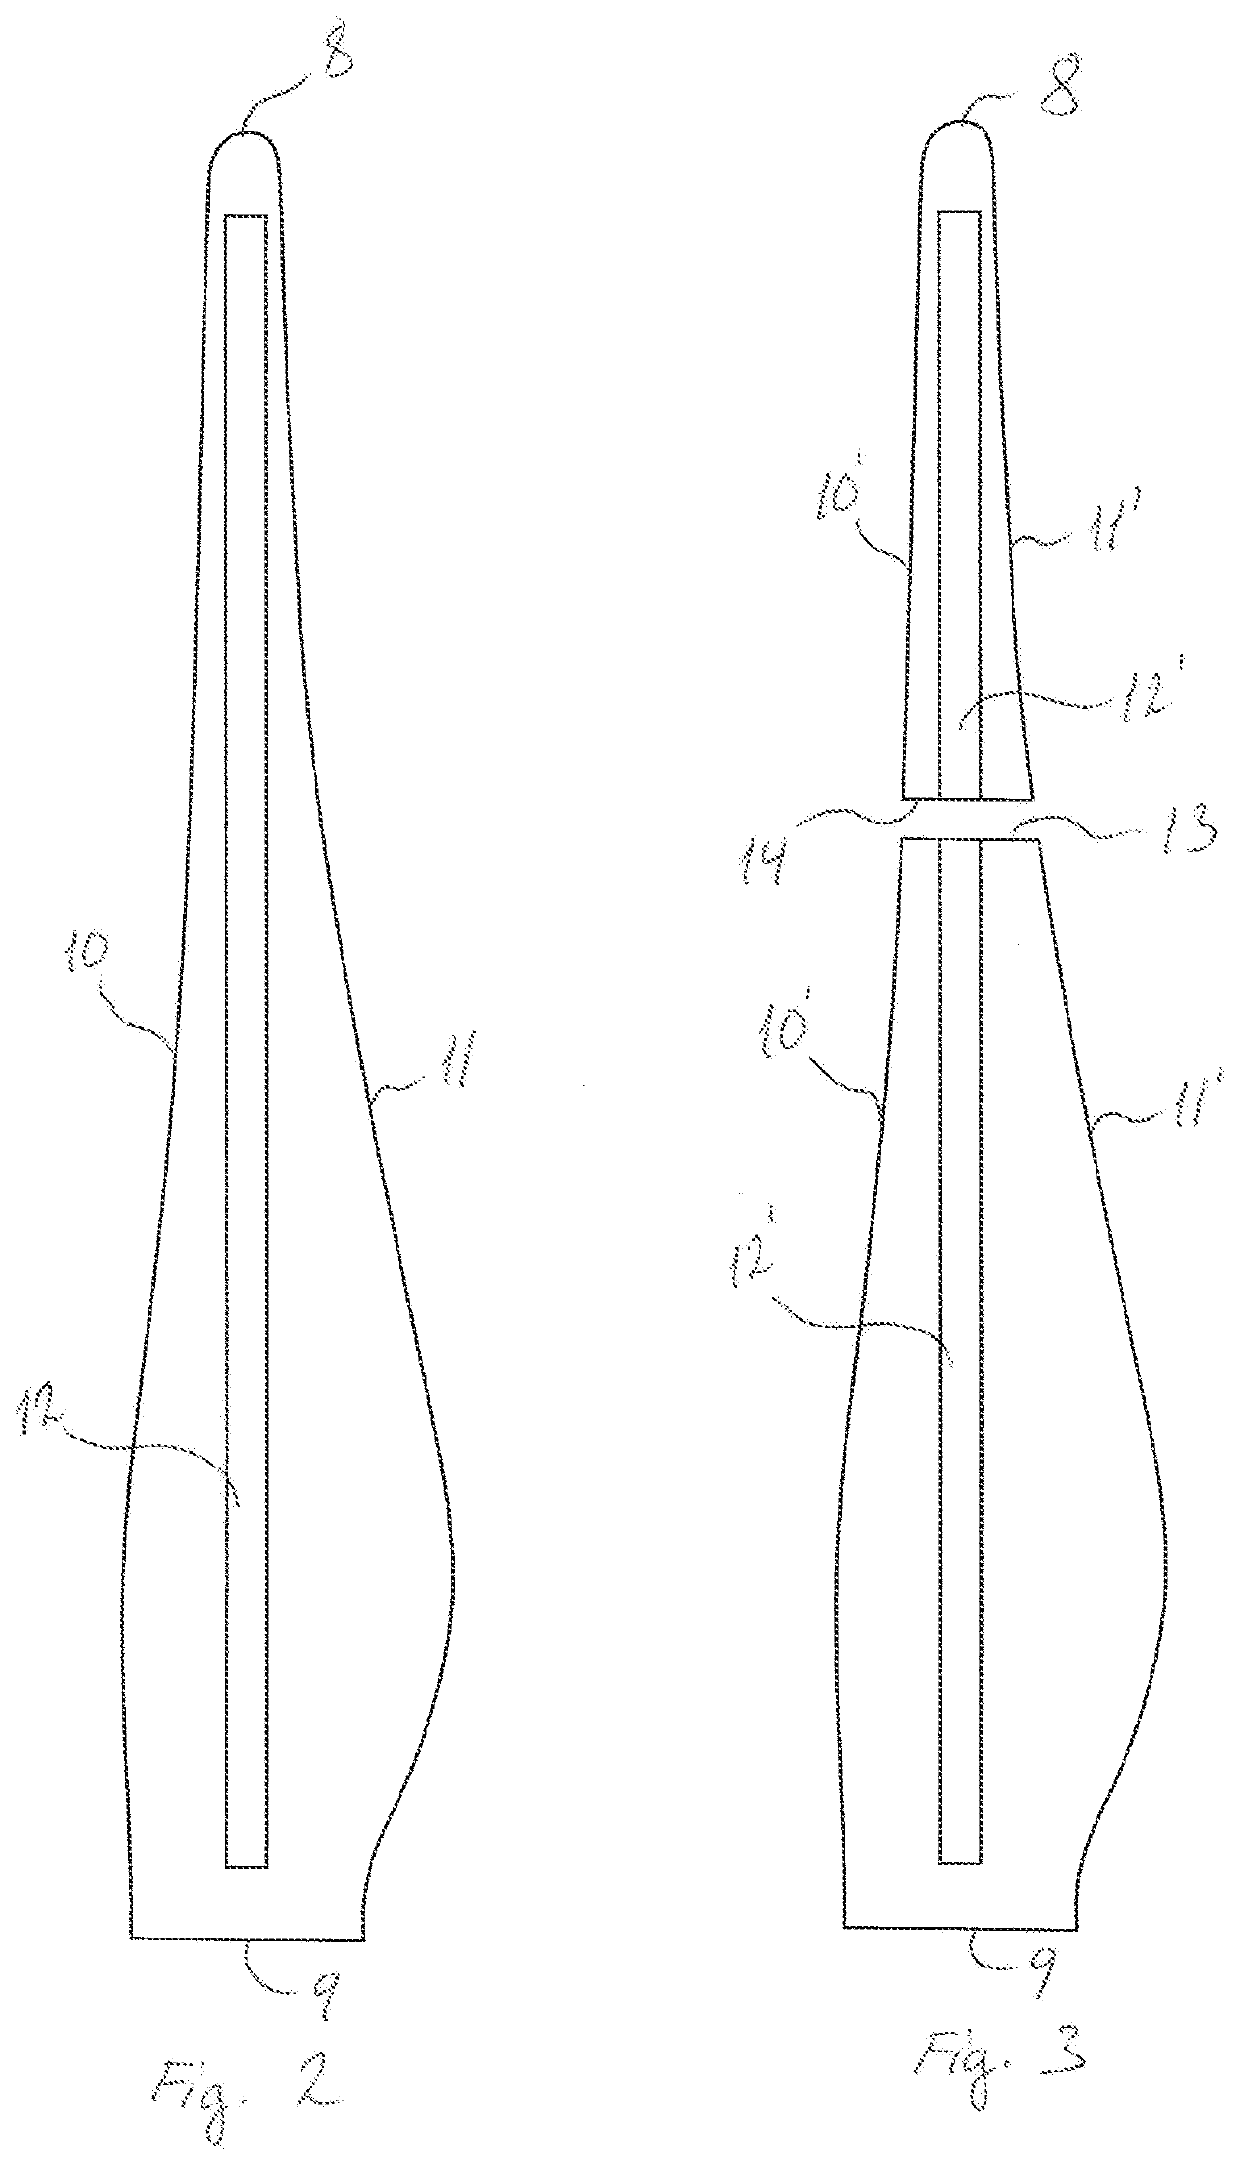 Wind turbine blade, method of manufacturing wind turbine blade, and use of fabric in composite structure of wind turbine blade